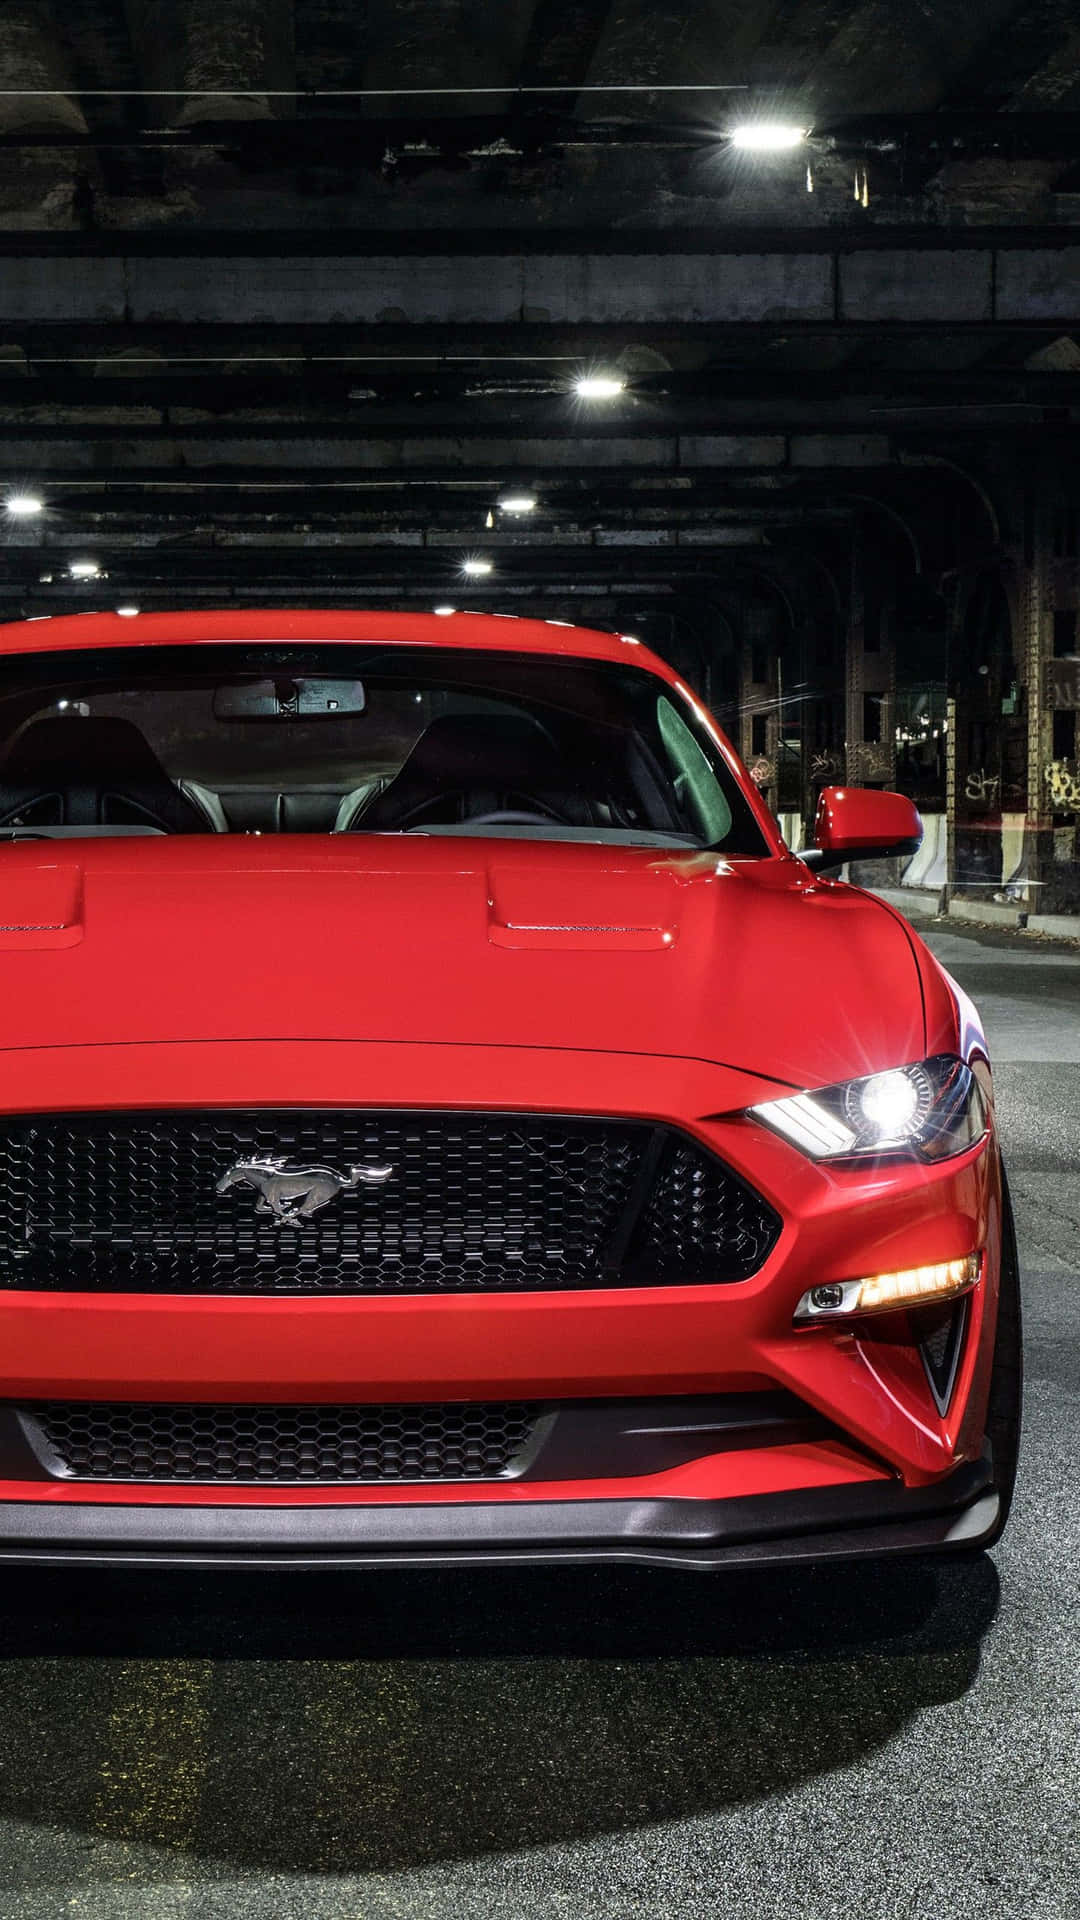 The Red 2019 Ford Mustang Gt Is Parked In A Garage Wallpaper